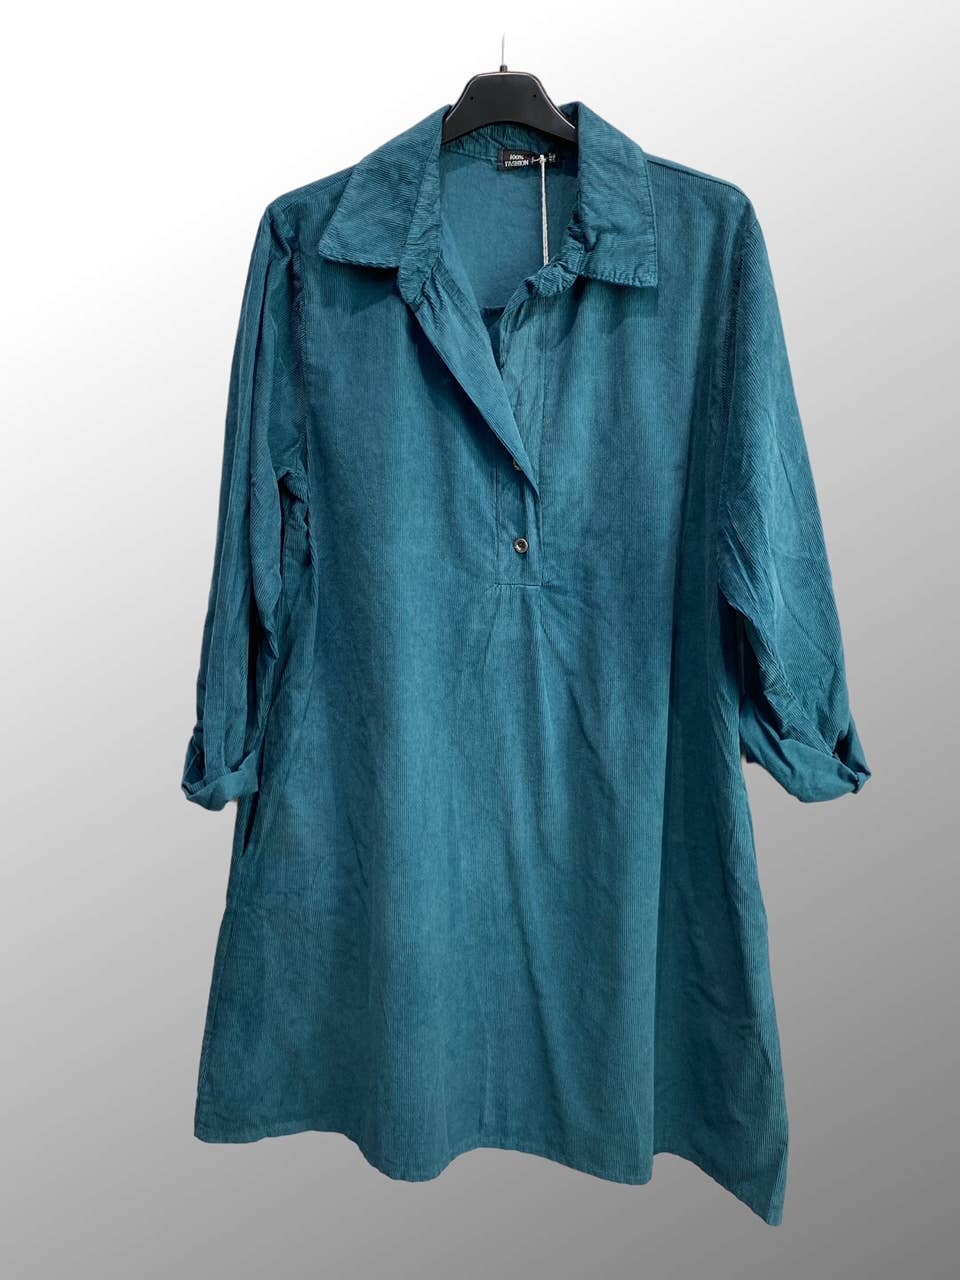 Cord shirt dress rue 83372 - Out of the Blue